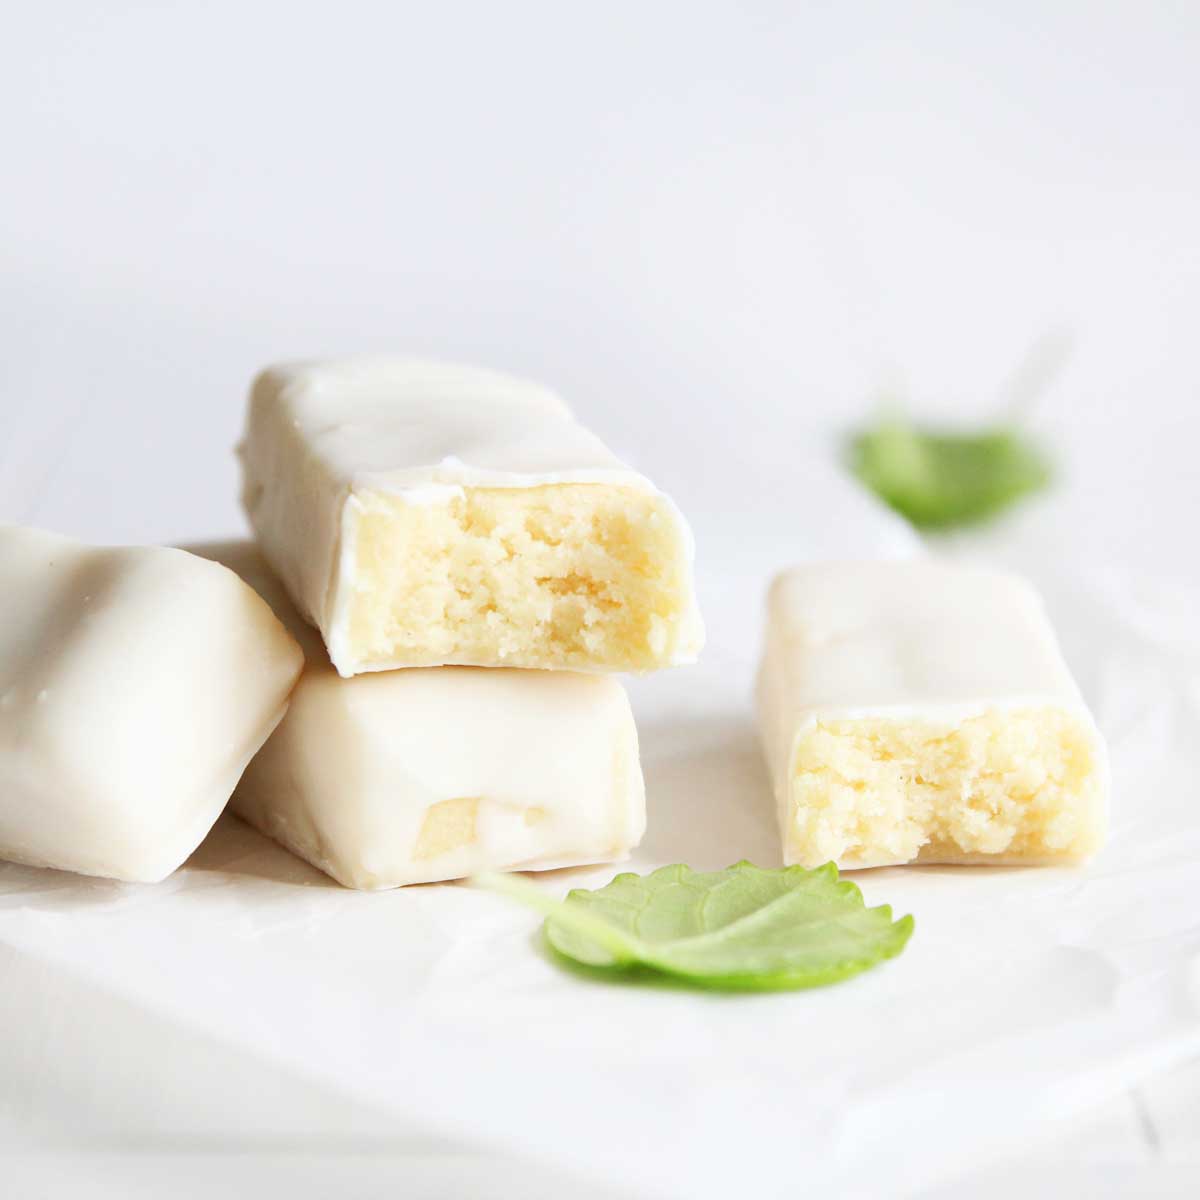 Healthy Homemade Lemon Protein Bars made with Collagen Peptides - Almond Joy Protein Bars